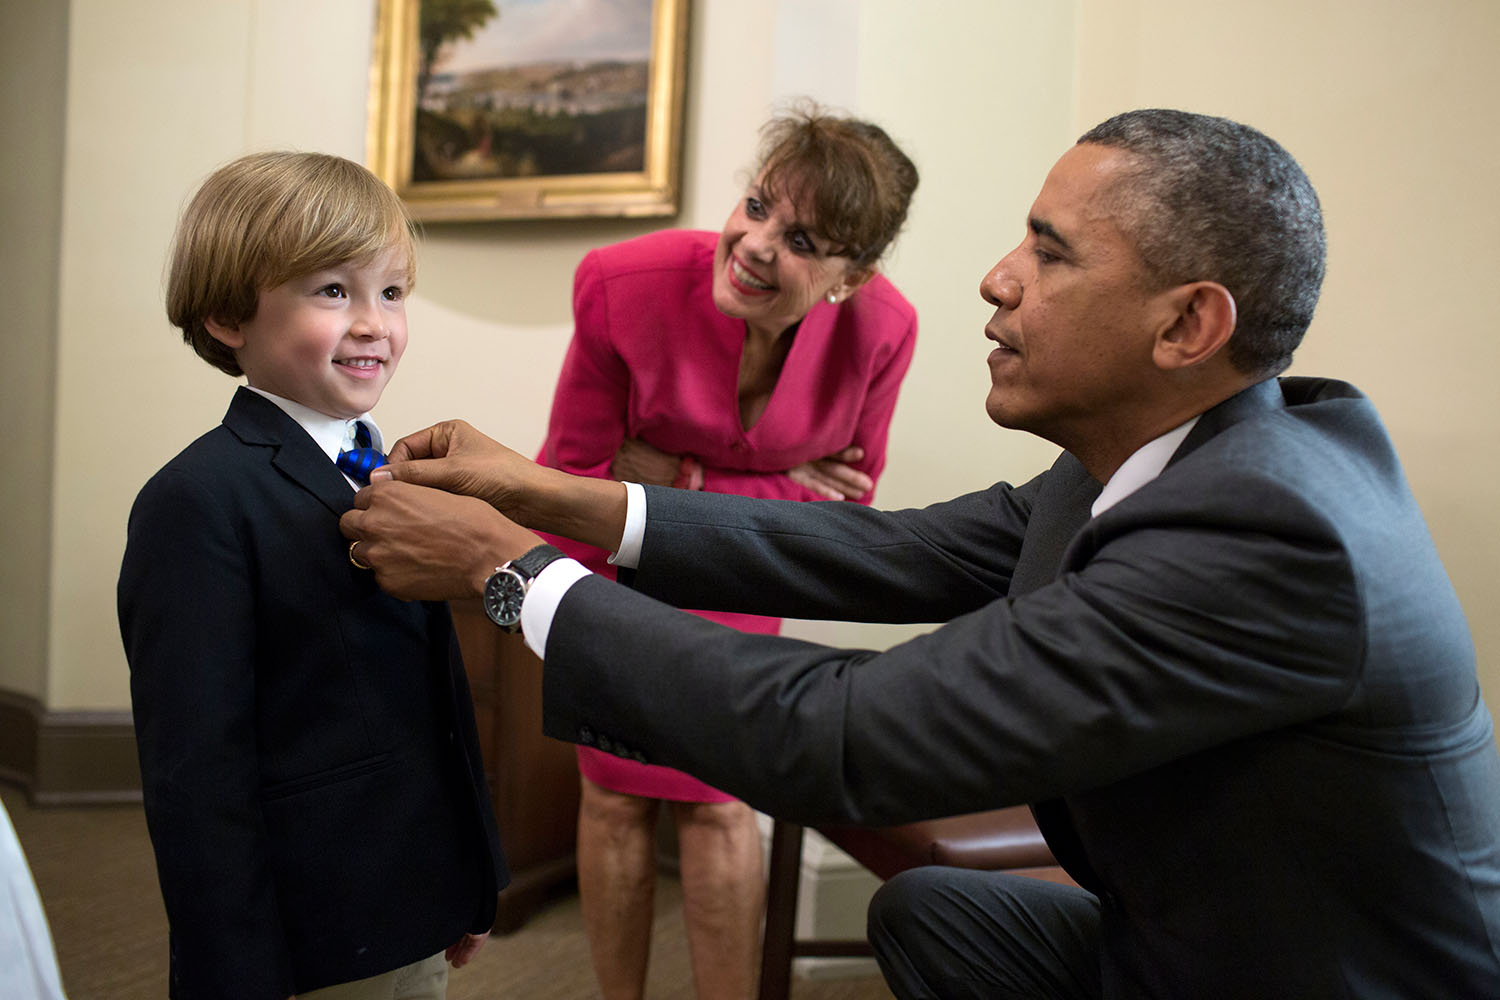 President Barack Obama adjusts the tie of Coast Guard Military Aide Cdr. Scott S. Phy's son outside the Oval Office, June 12, 2014. Cdr. Phy and his family were in the Oval Office for an award citation and departure photos with the President. (Official White House Photo by Pete Souza)

This official White House photograph is being made available only for publication by news organizations and/or for personal use printing by the subject(s) of the photograph. The photograph may not be manipulated in any way and may not be used in commercial or political materials, advertisements, emails, products, promotions that in any way suggests approval or endorsement of the President, the First Family, or the White House.